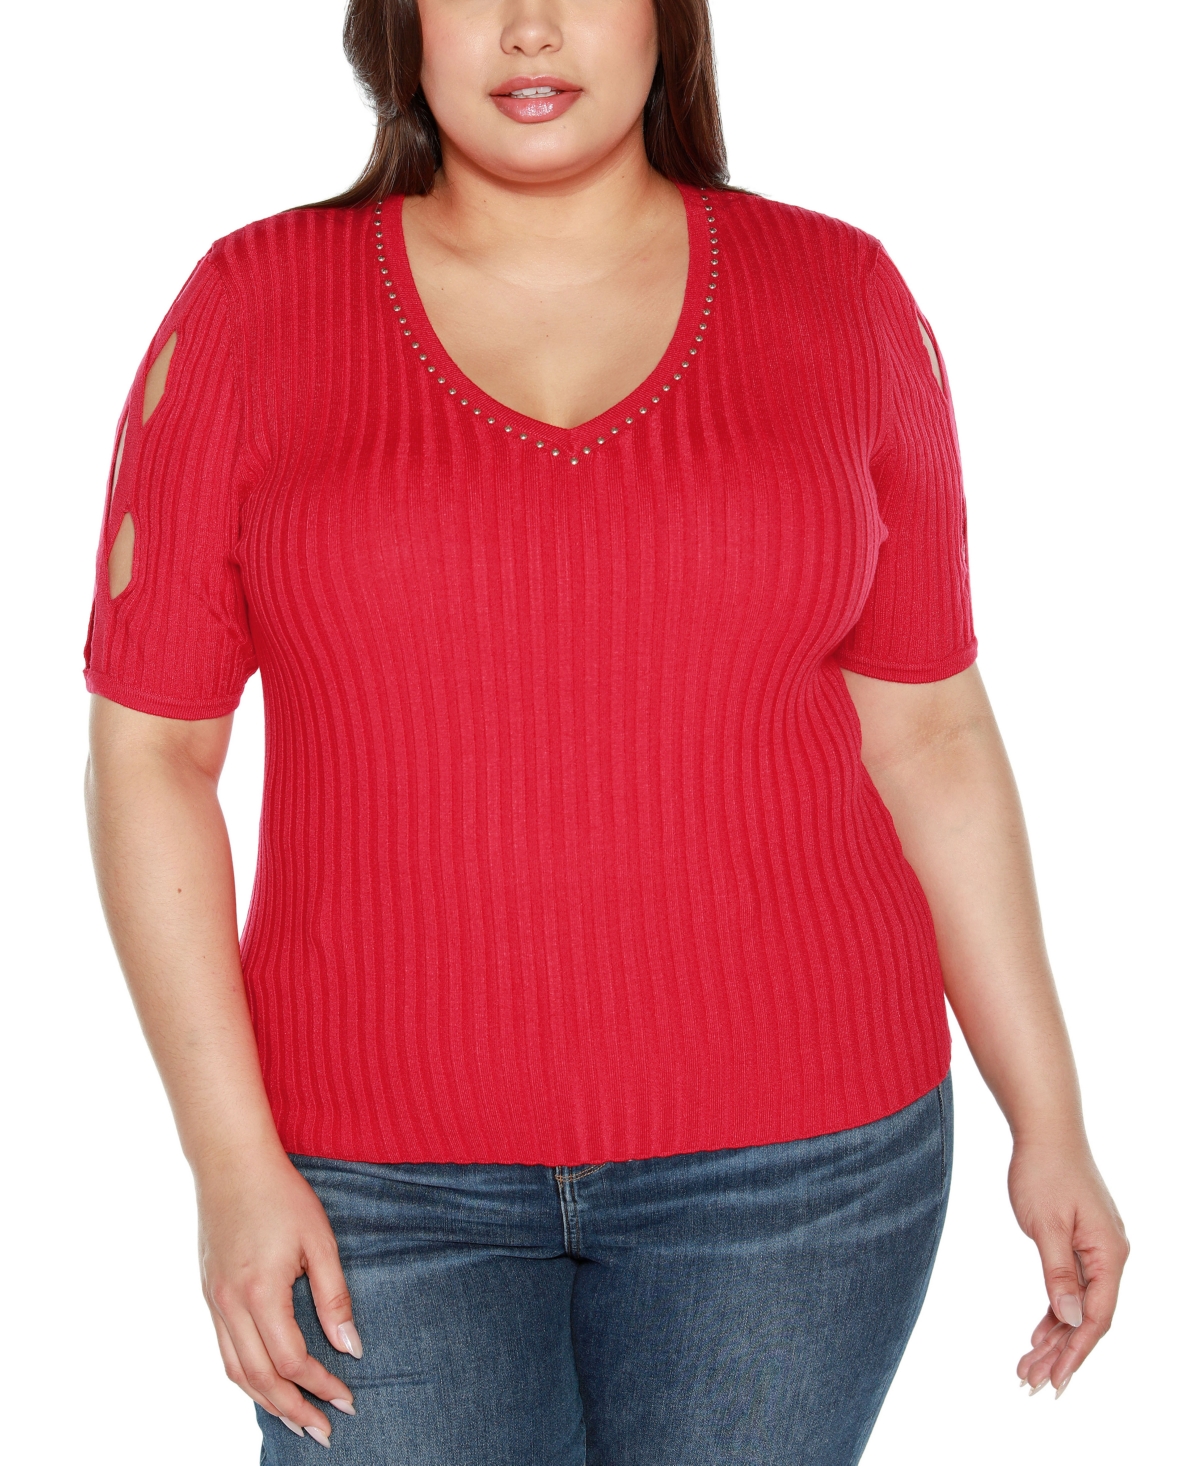 Belldini Black Label Plus Size Embellished Criss Cross Sleeve Sweater In Red